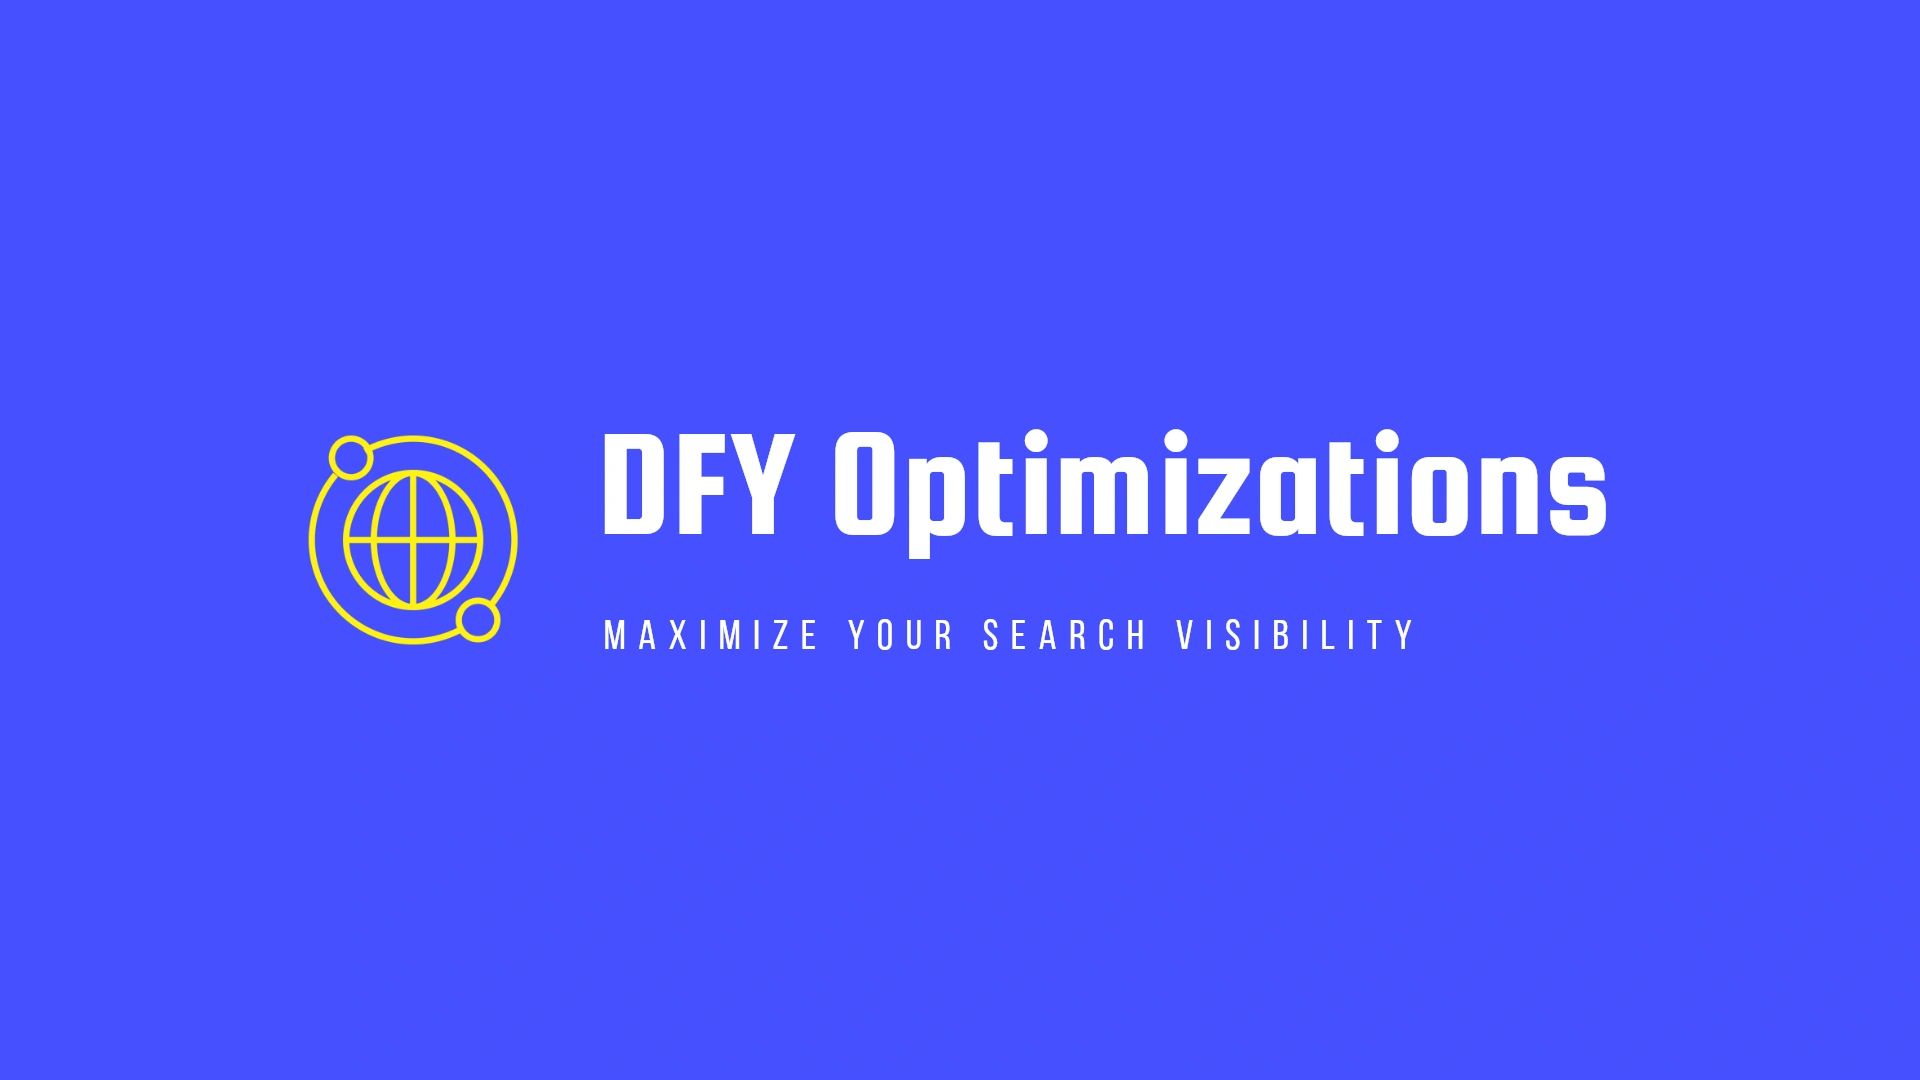 Dfy Optimizations, Maximize Your Search Visibility